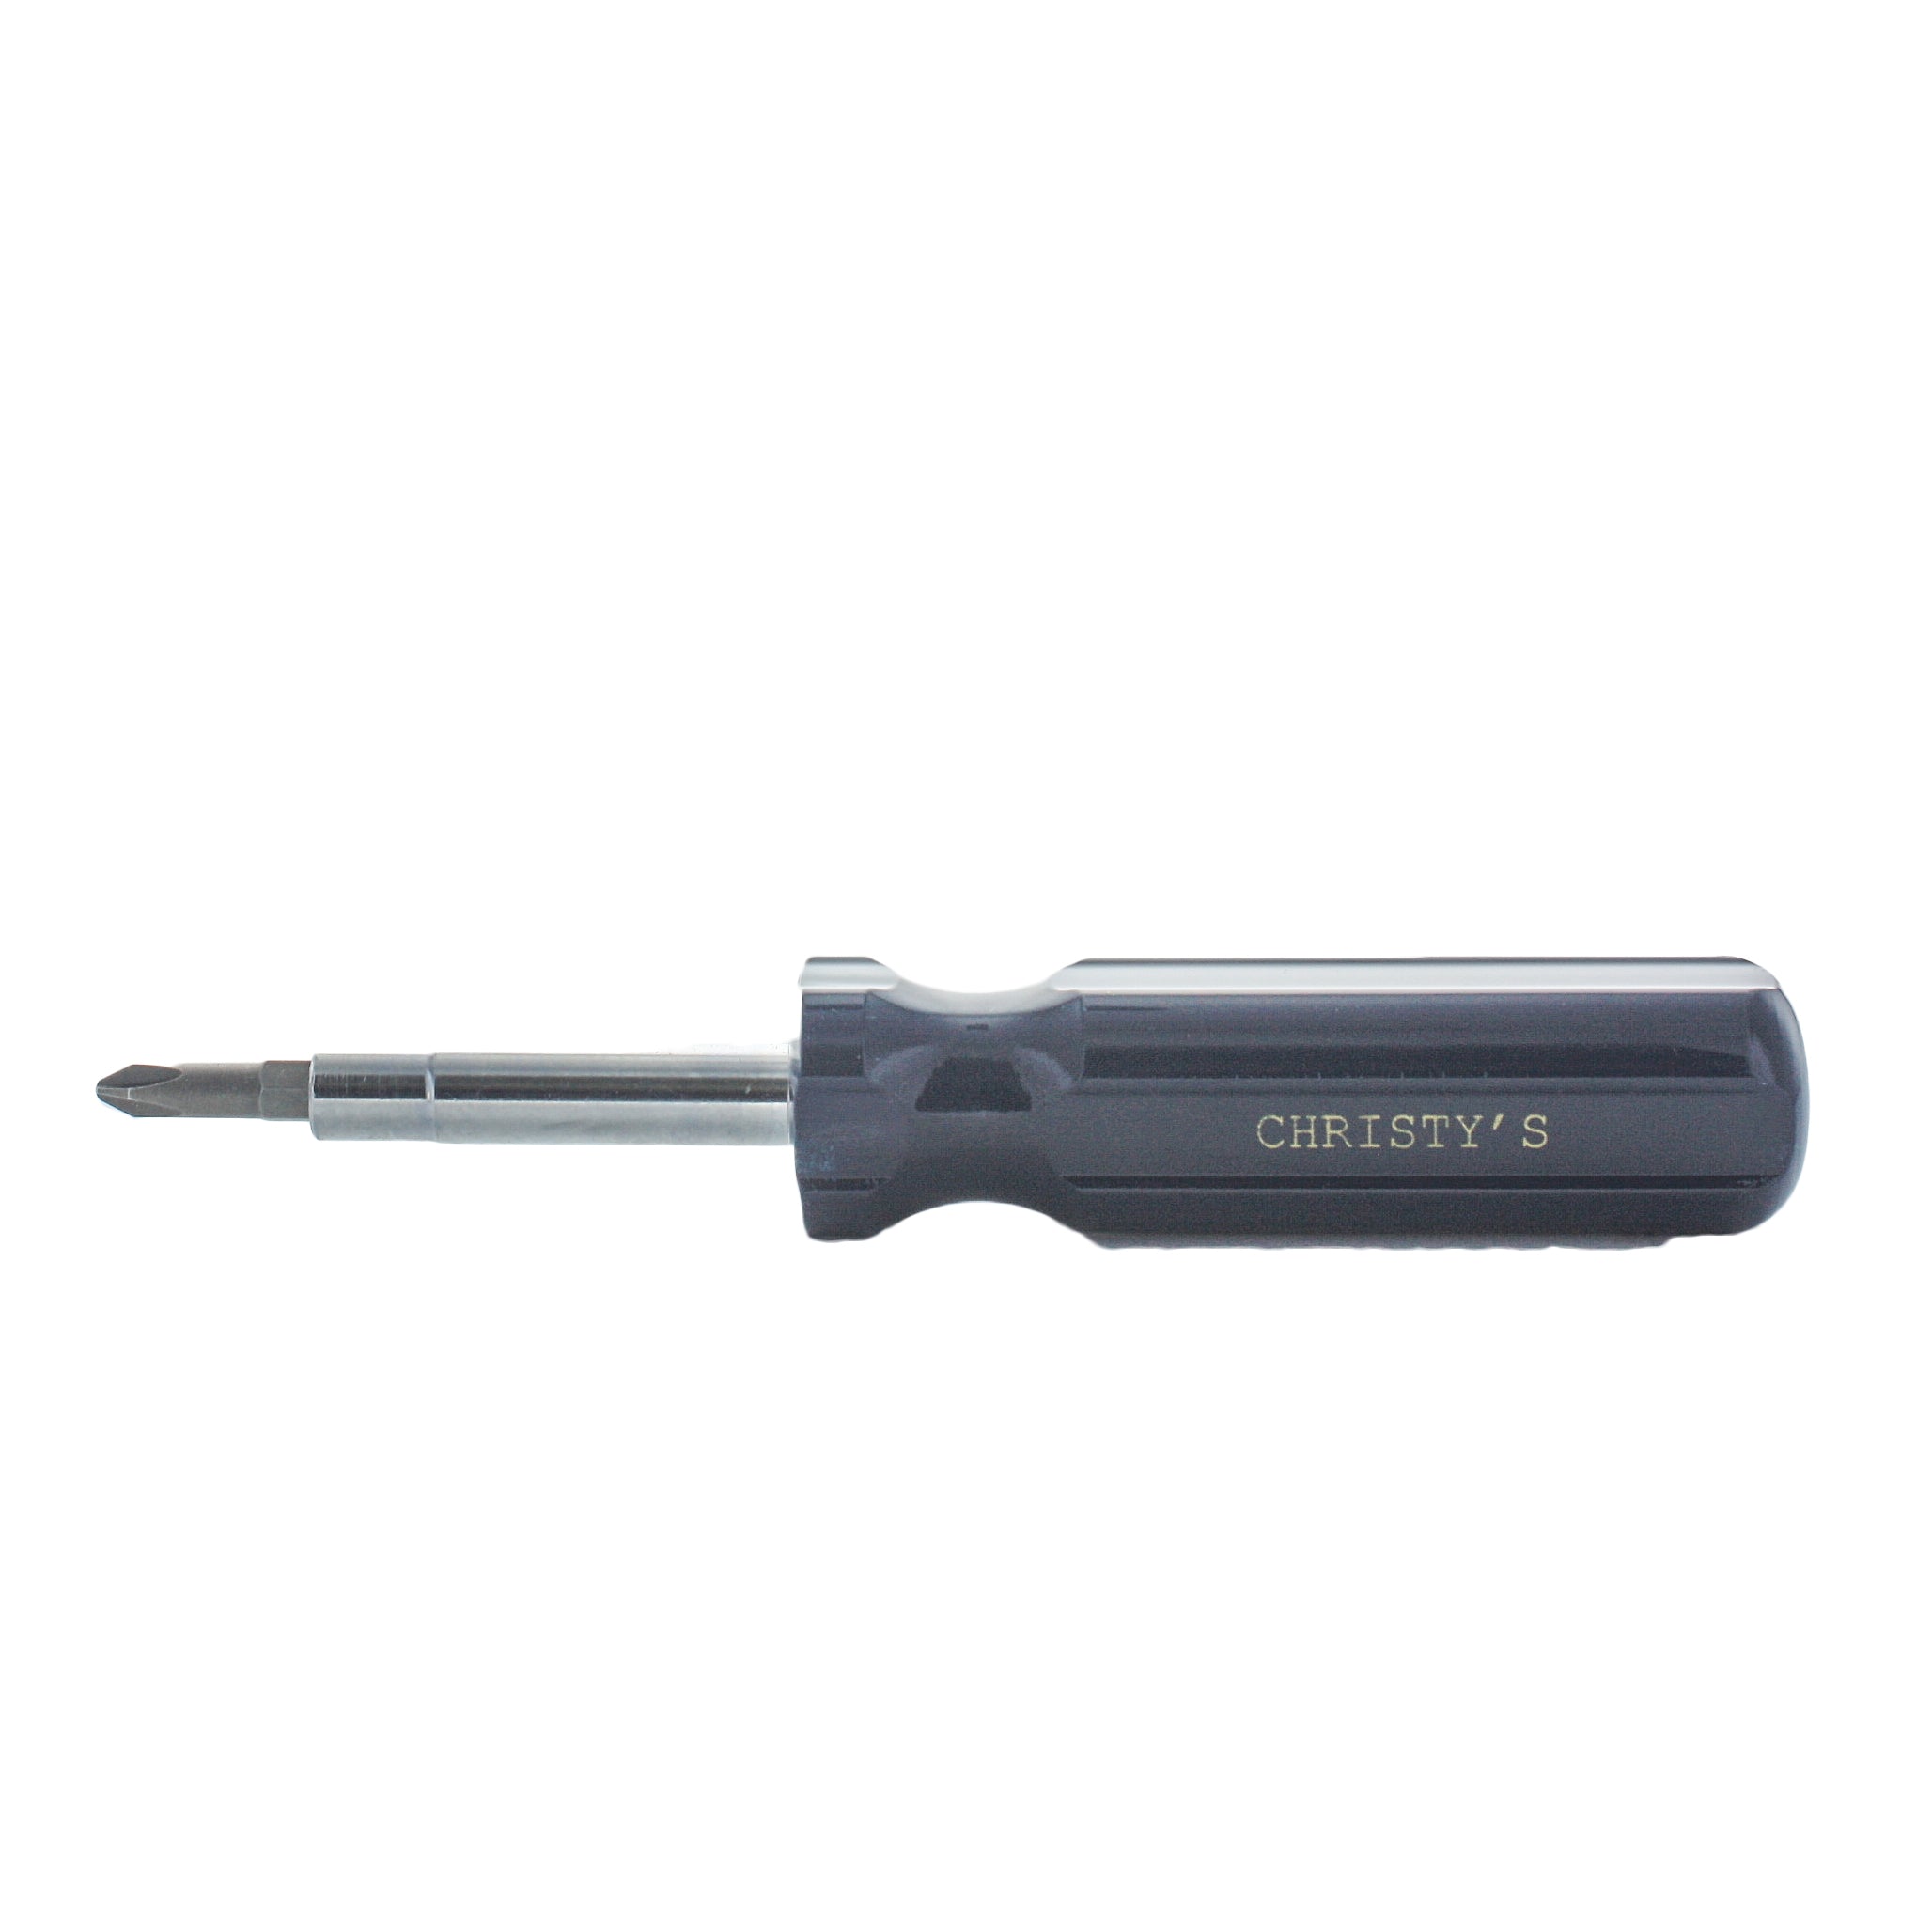 Christy's - 6N1TC - 6 In one Screwdriver